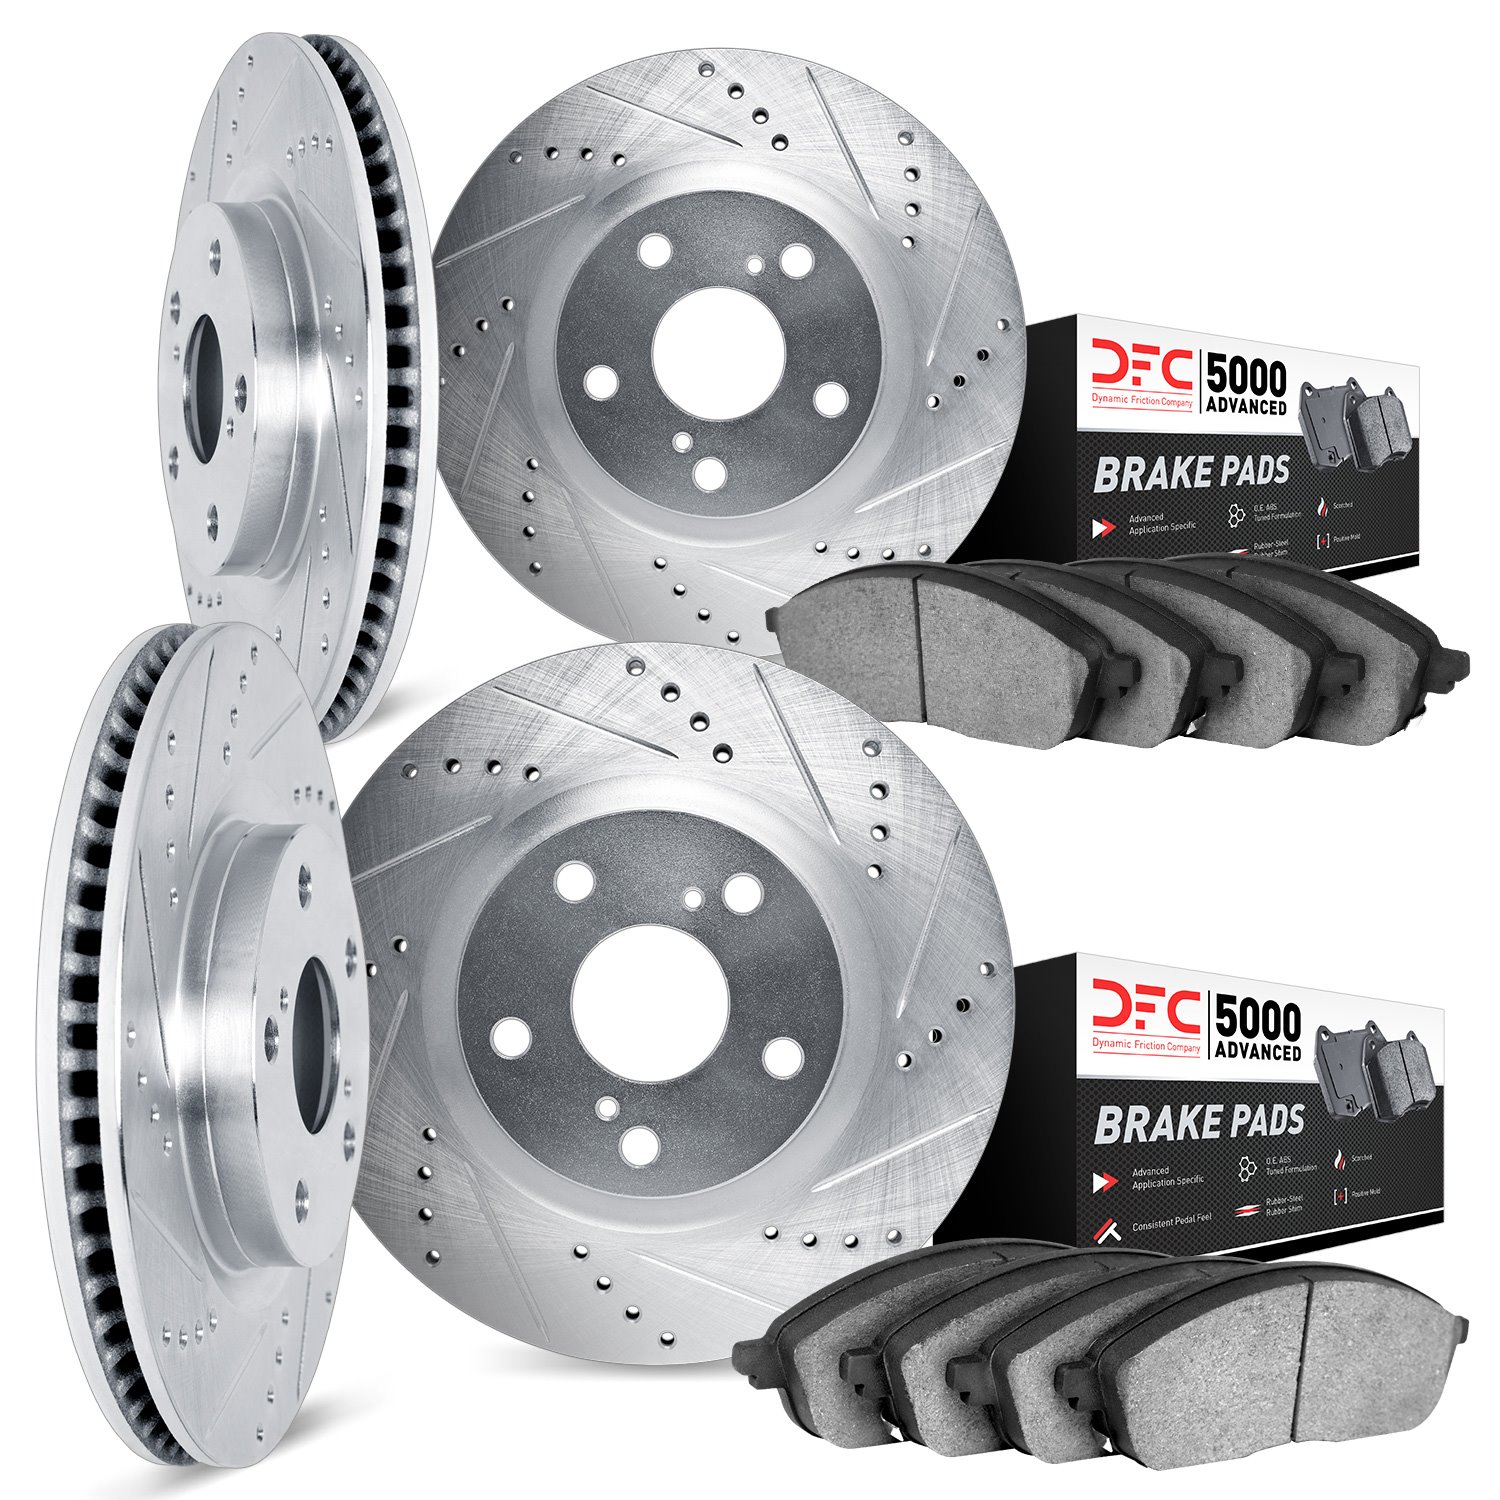 7504-02009 Drilled/Slotted Brake Rotors w/5000 Advanced Brake Pads Kit [Silver], 1987-1995 Porsche, Position: Front and Rear